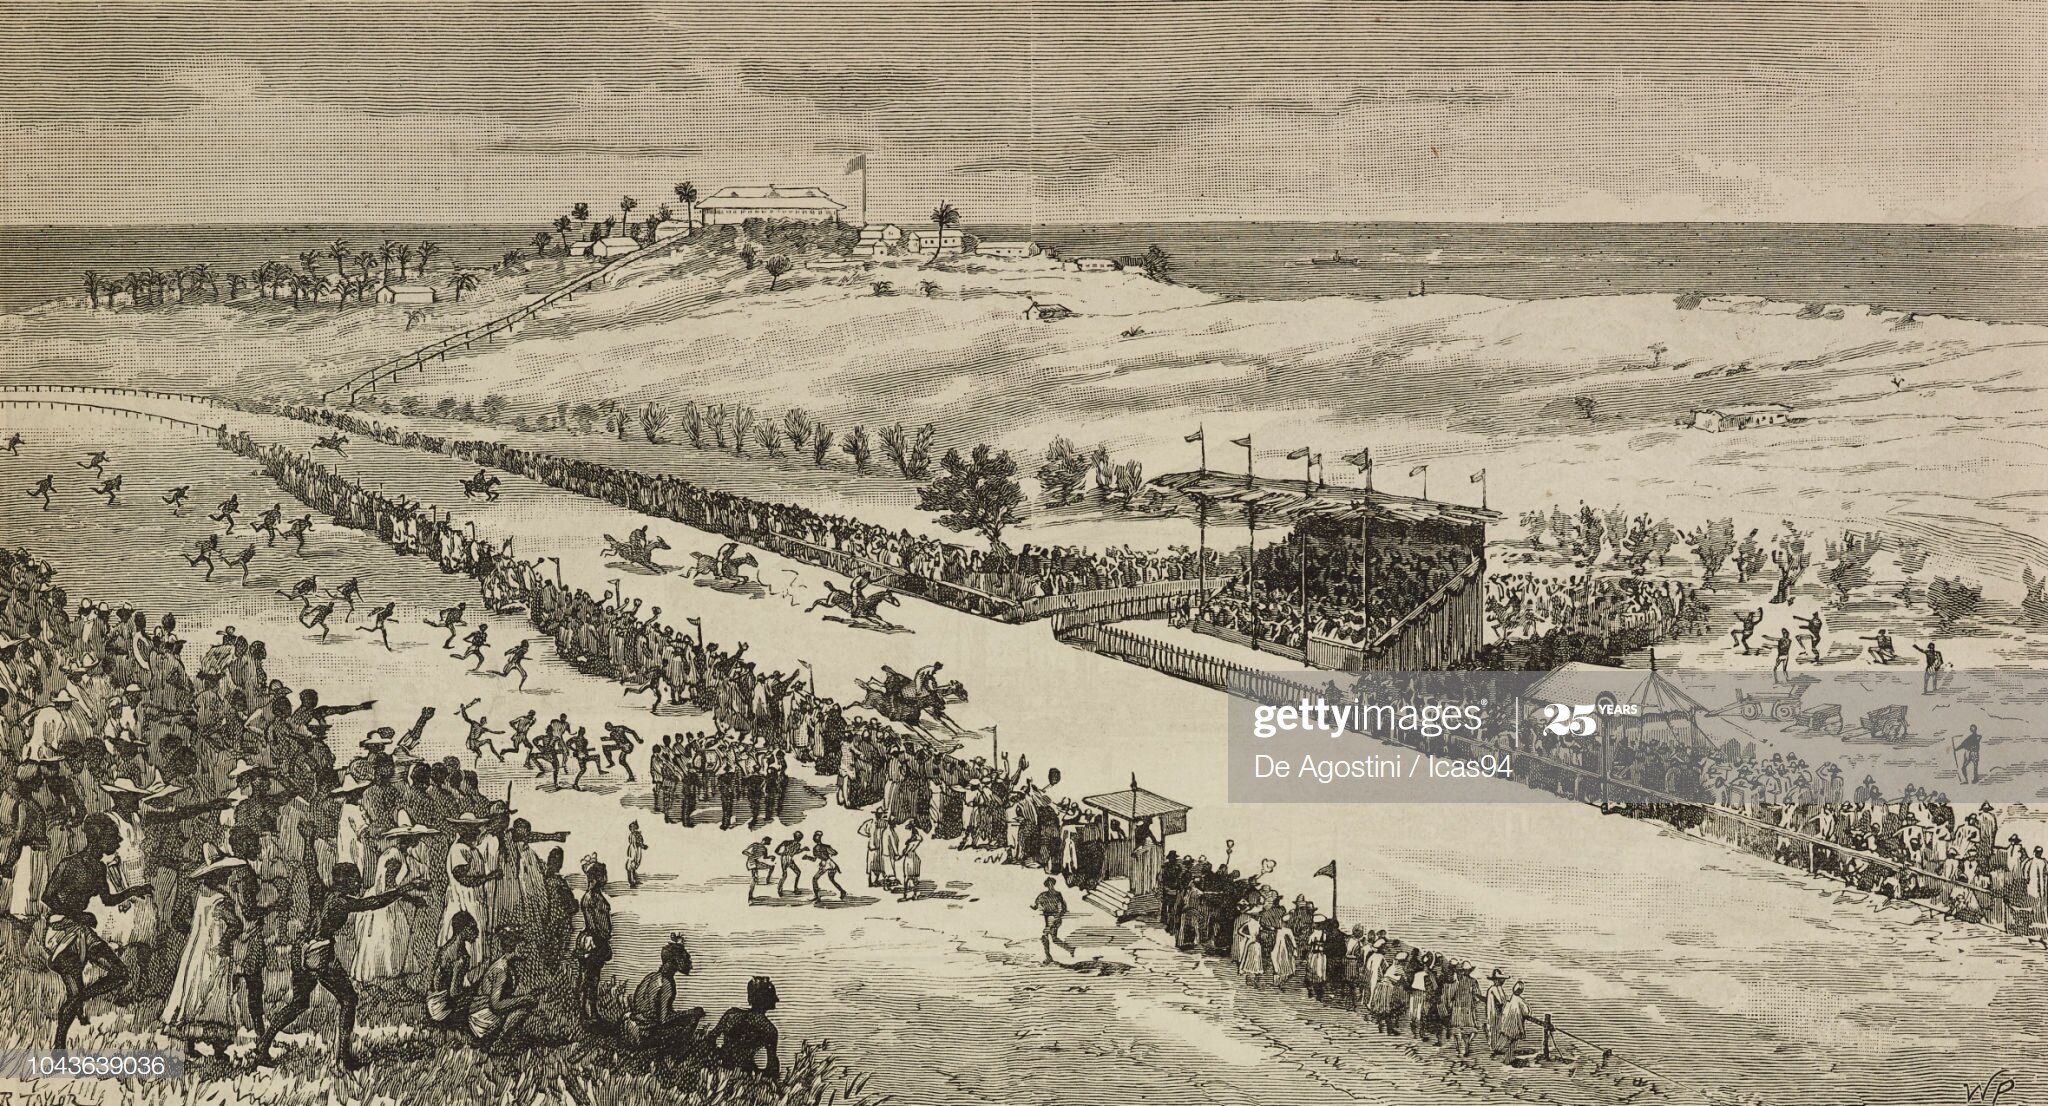 Race for the Brandford Cup, Horse-Racing at Accra, on the Gold Coast, Ghana, engraving from The Illustrated London News, volume 97, No 2685, October 4, 1890 - stock illustration.jpg